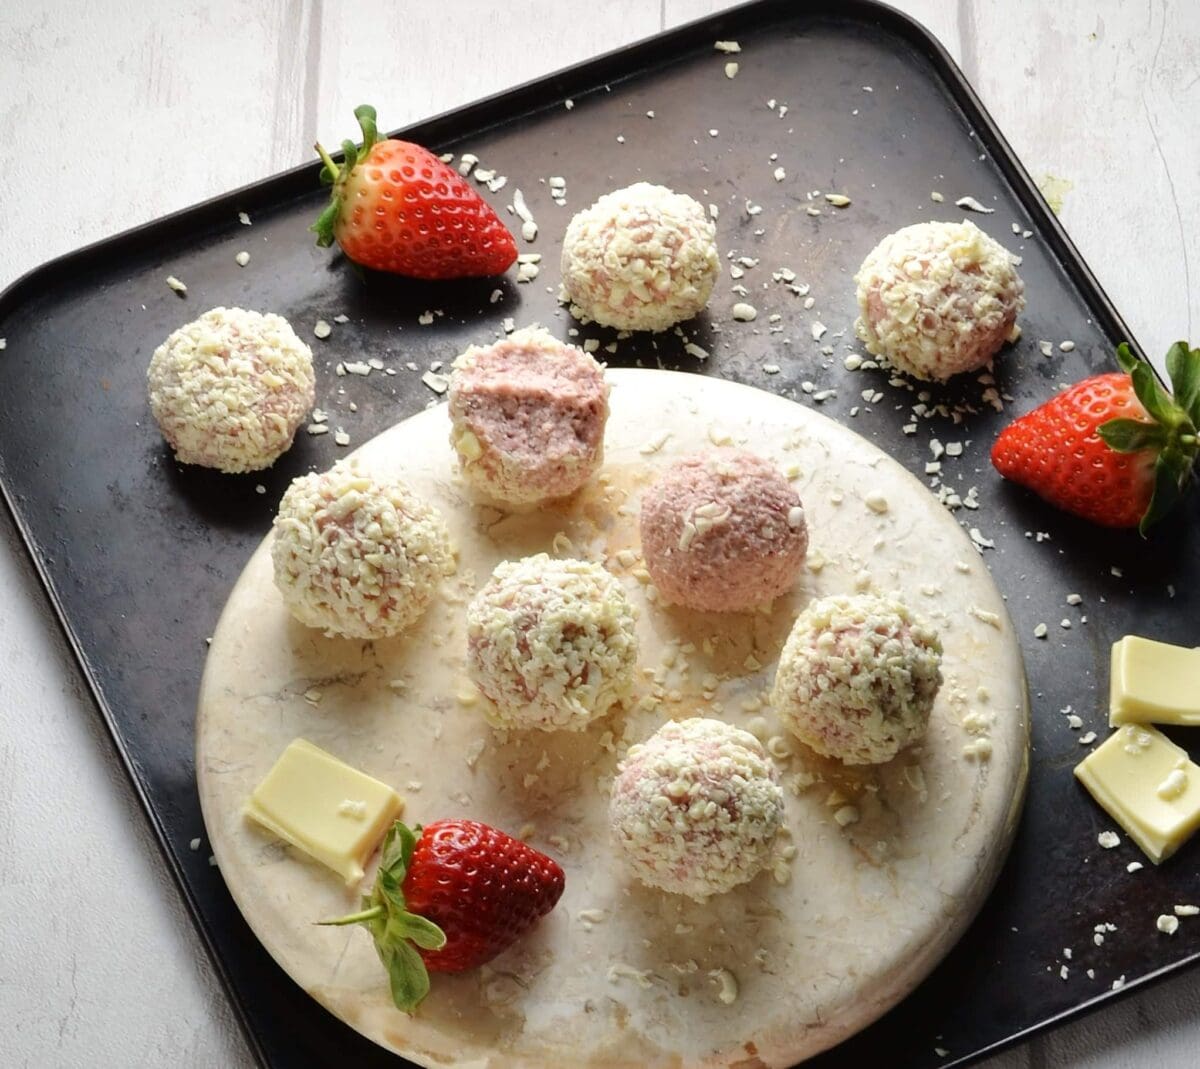 Strawberry cheesecake balls on round marble plate with strawberries and white chocolate on oven tray.